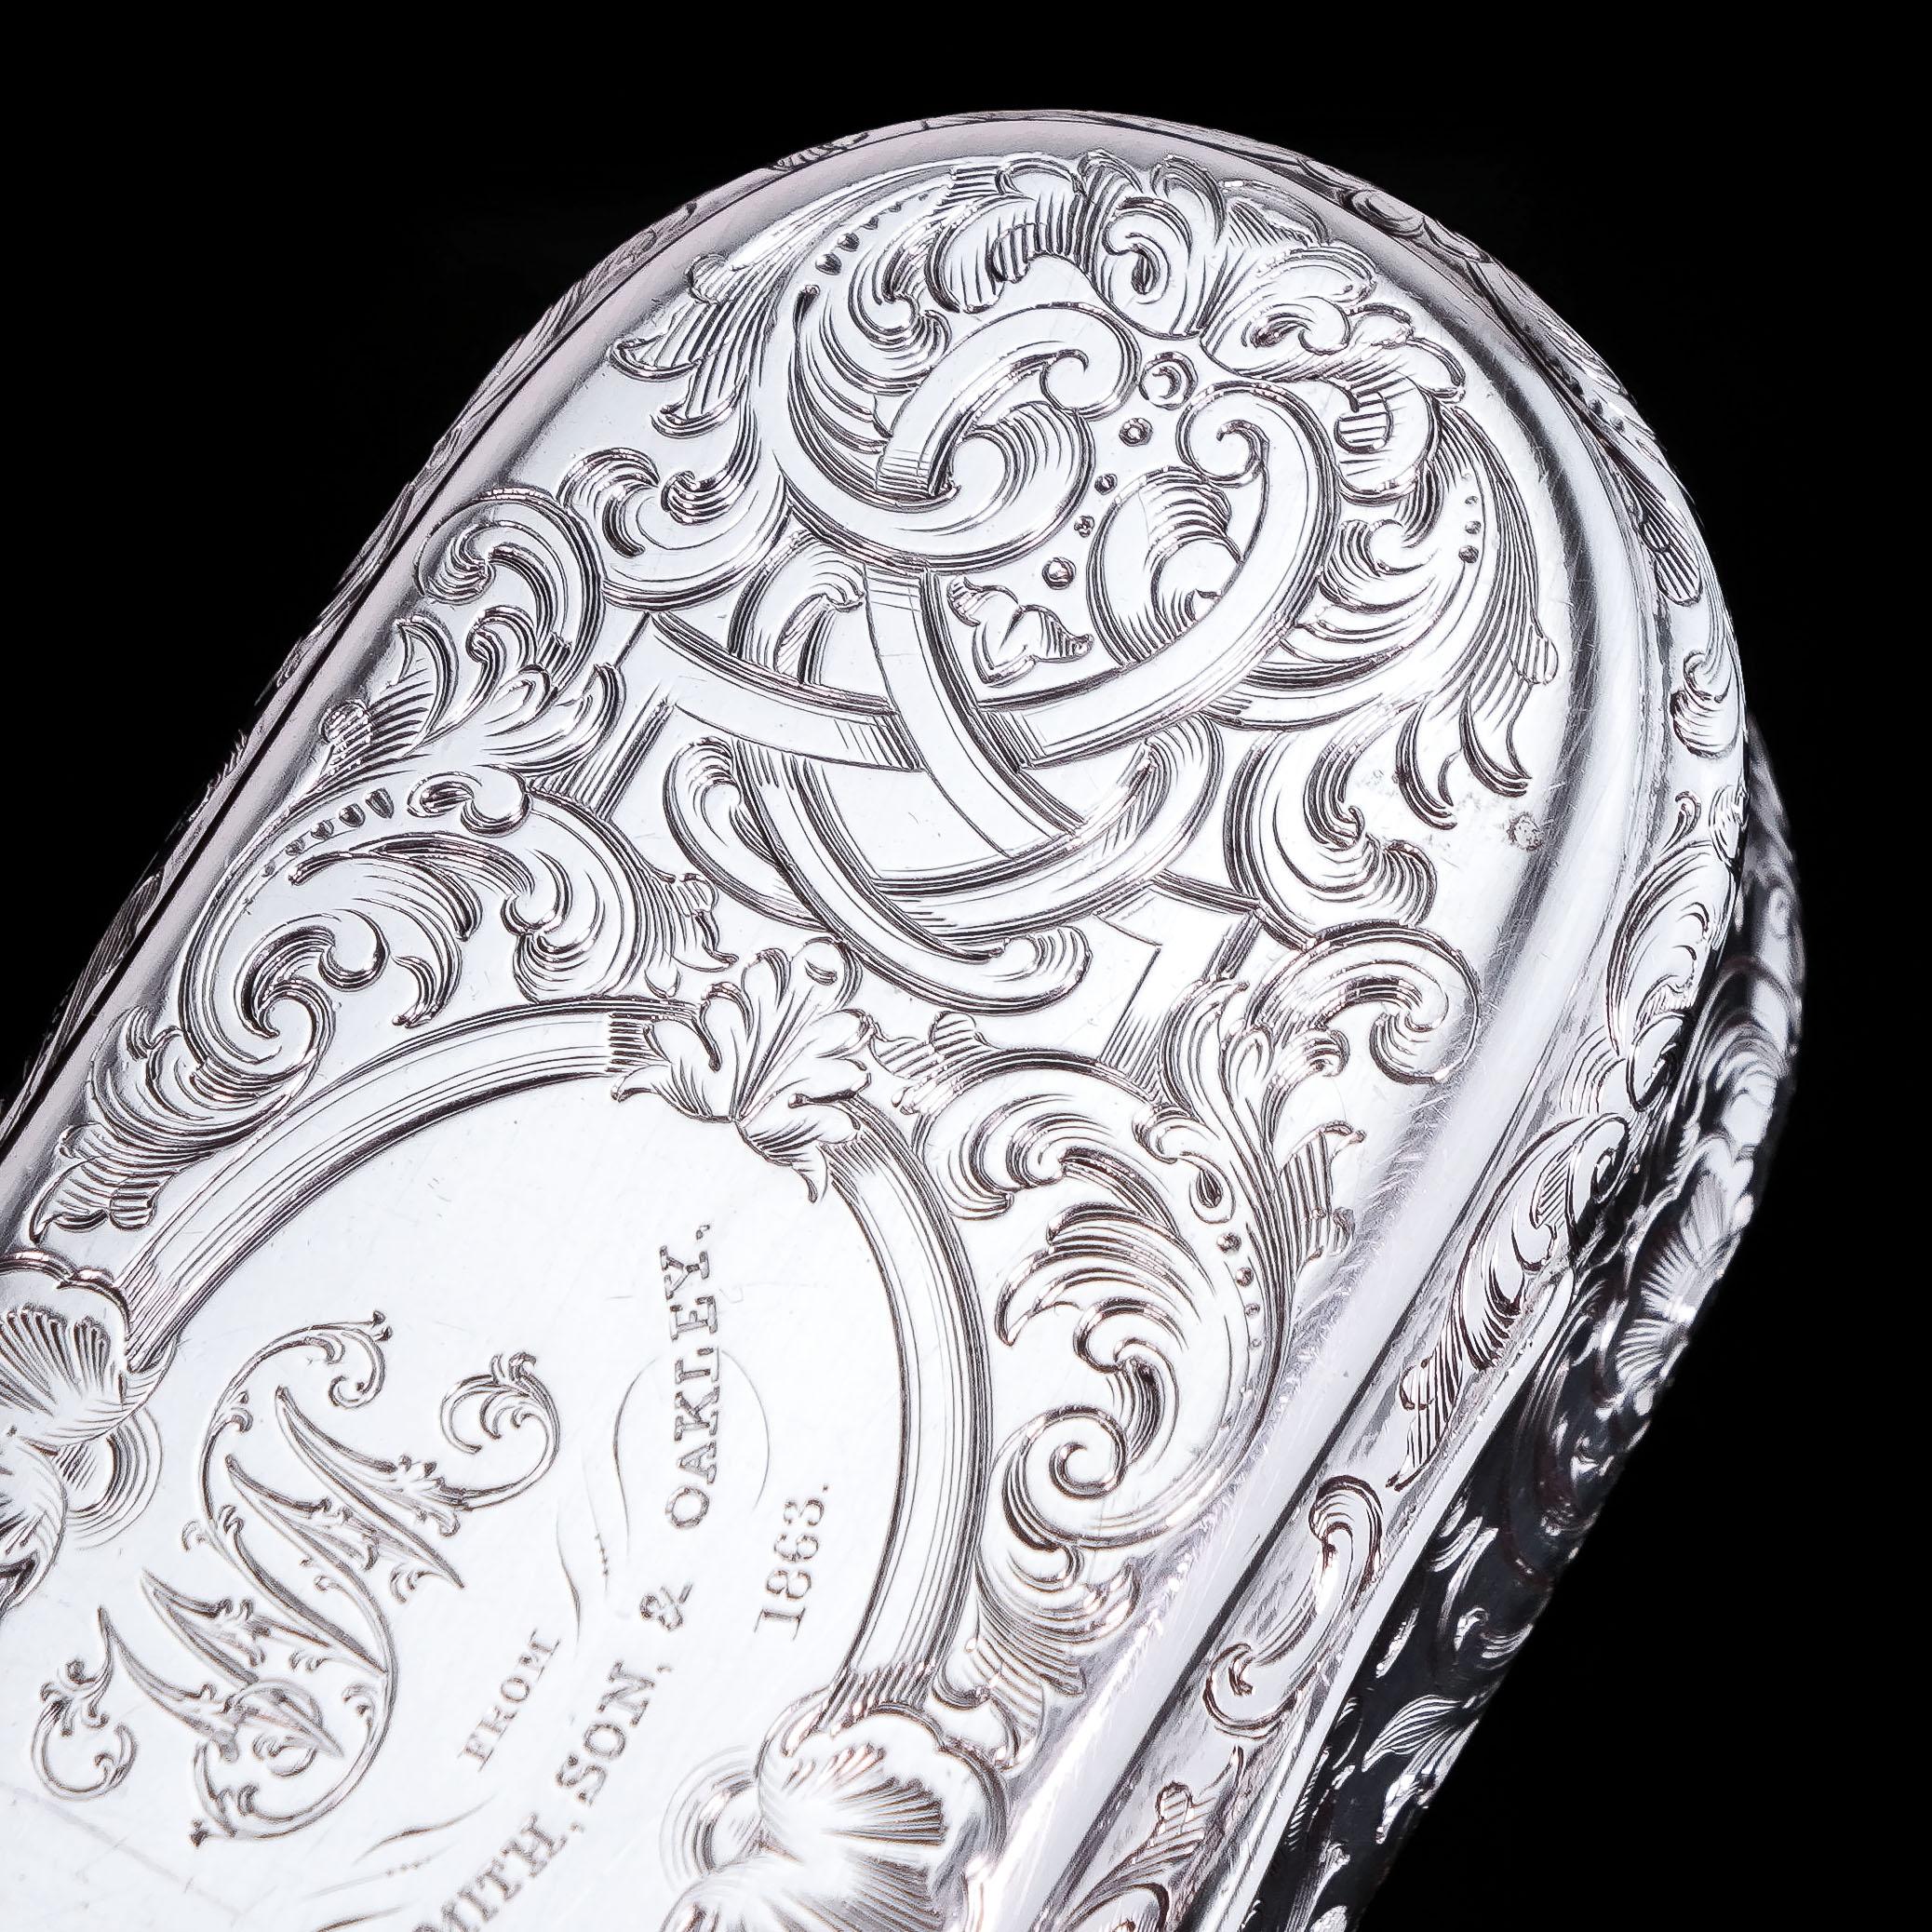 Antique Silver Snuff Box Oblong Shape - Charles Rawlings & William Summers 1849 For Sale 6